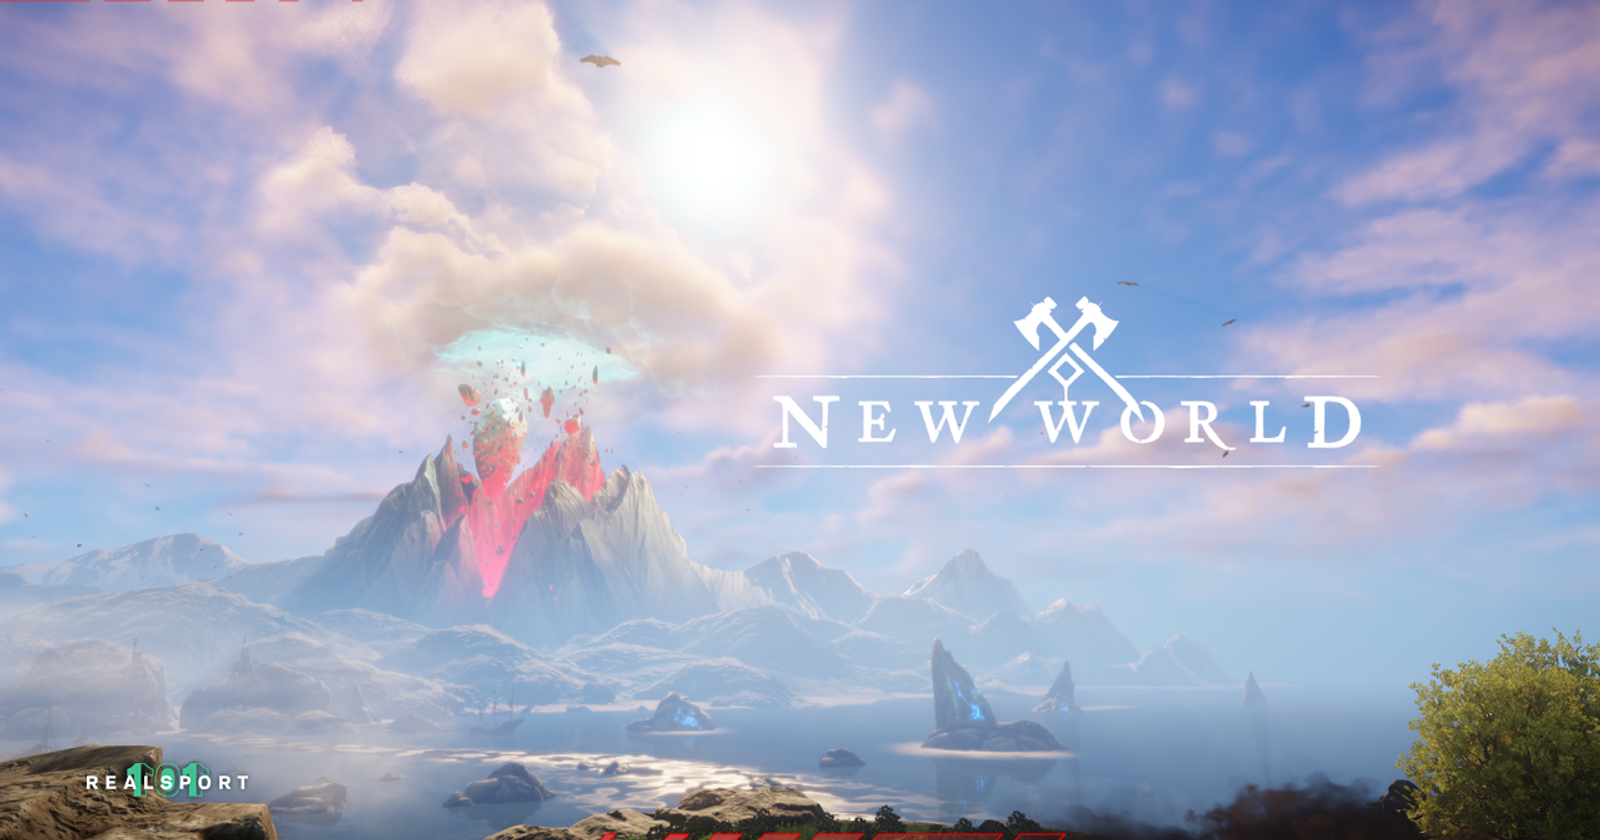 Project New World) HOW TO MAKE/JOIN A CREW IN PROJECT NEW WORLD